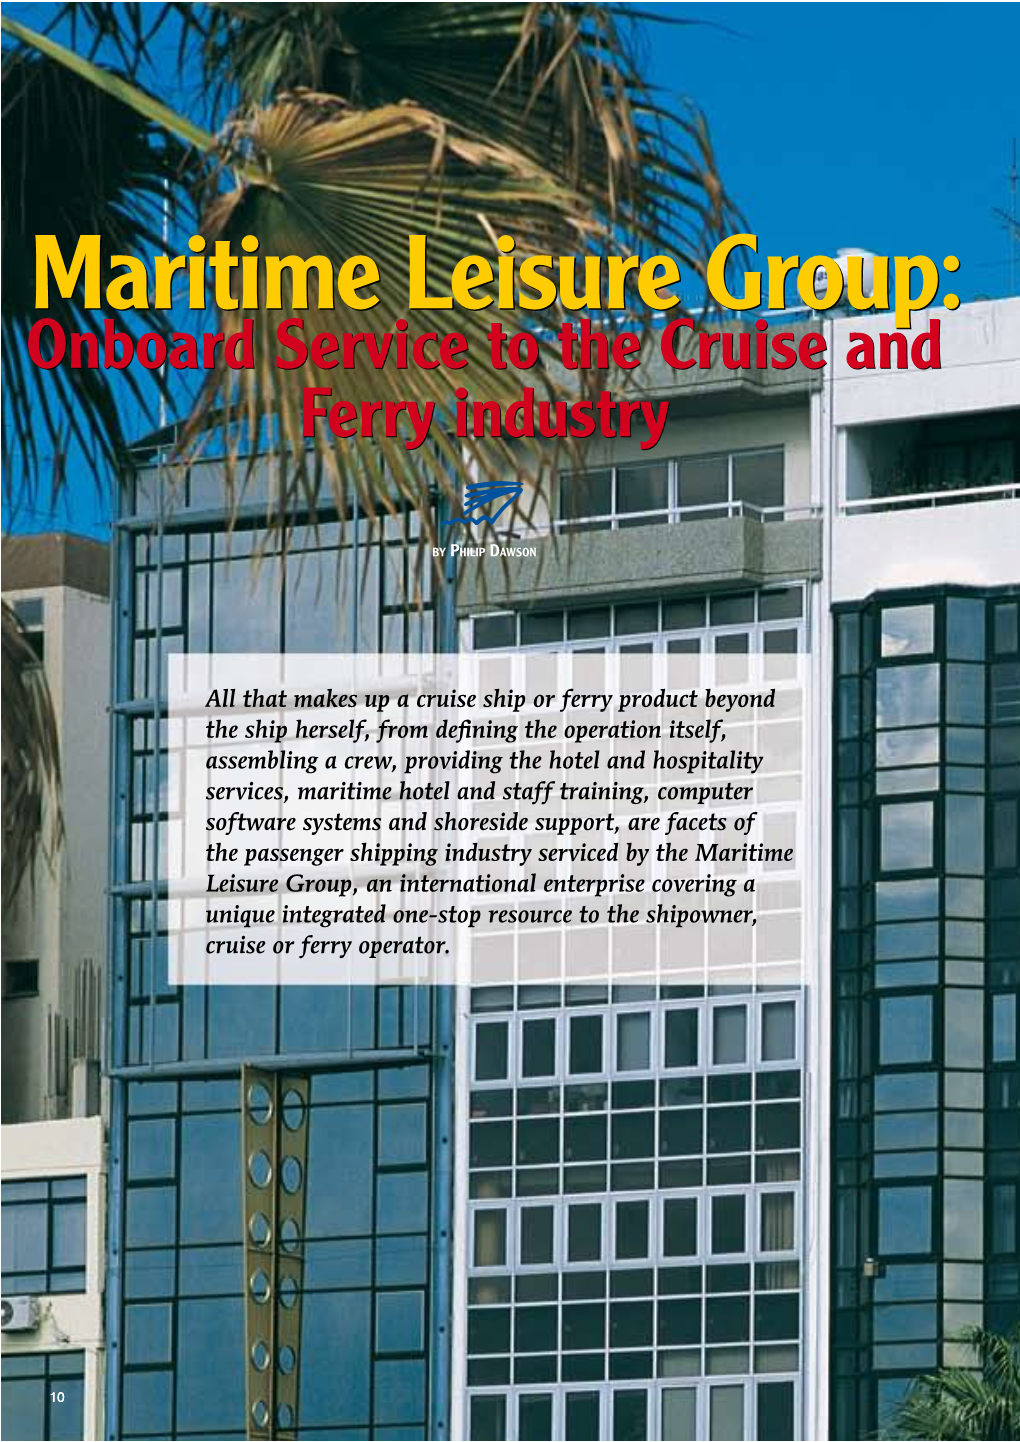 Maritime Leisure Group: Onboard Service to the Cruise and Ferry Industry